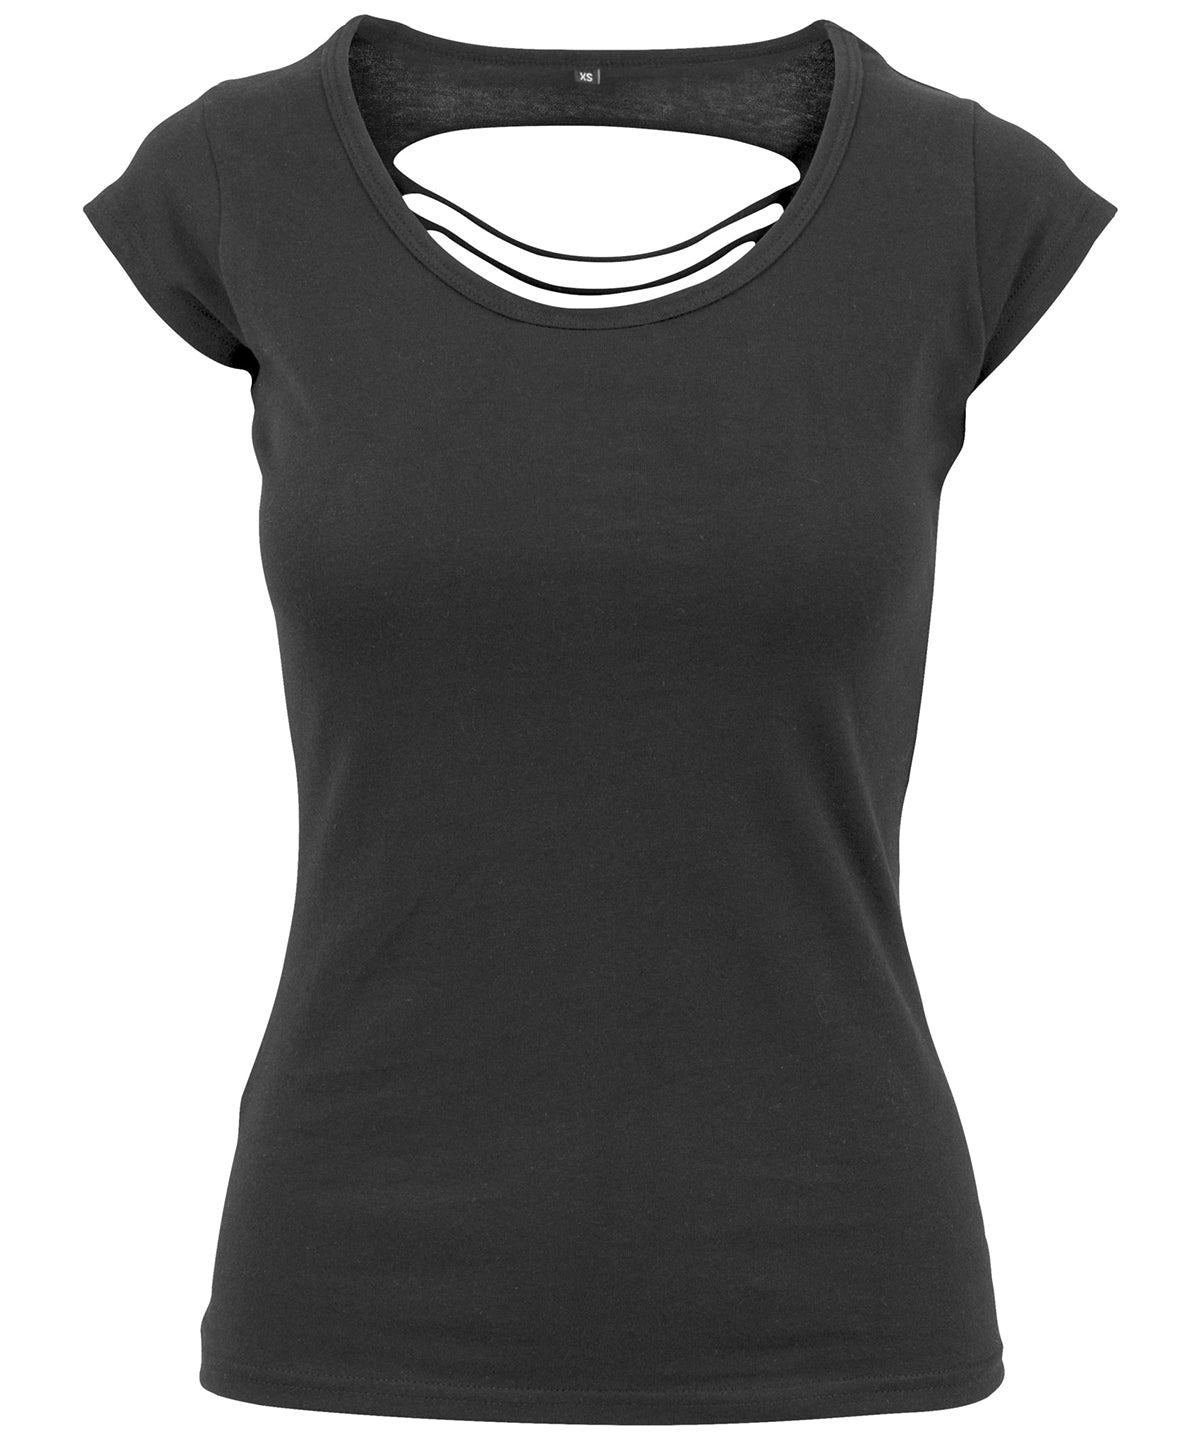 Personalised T-Shirts - Black Build Your Brand Women's back cut tee